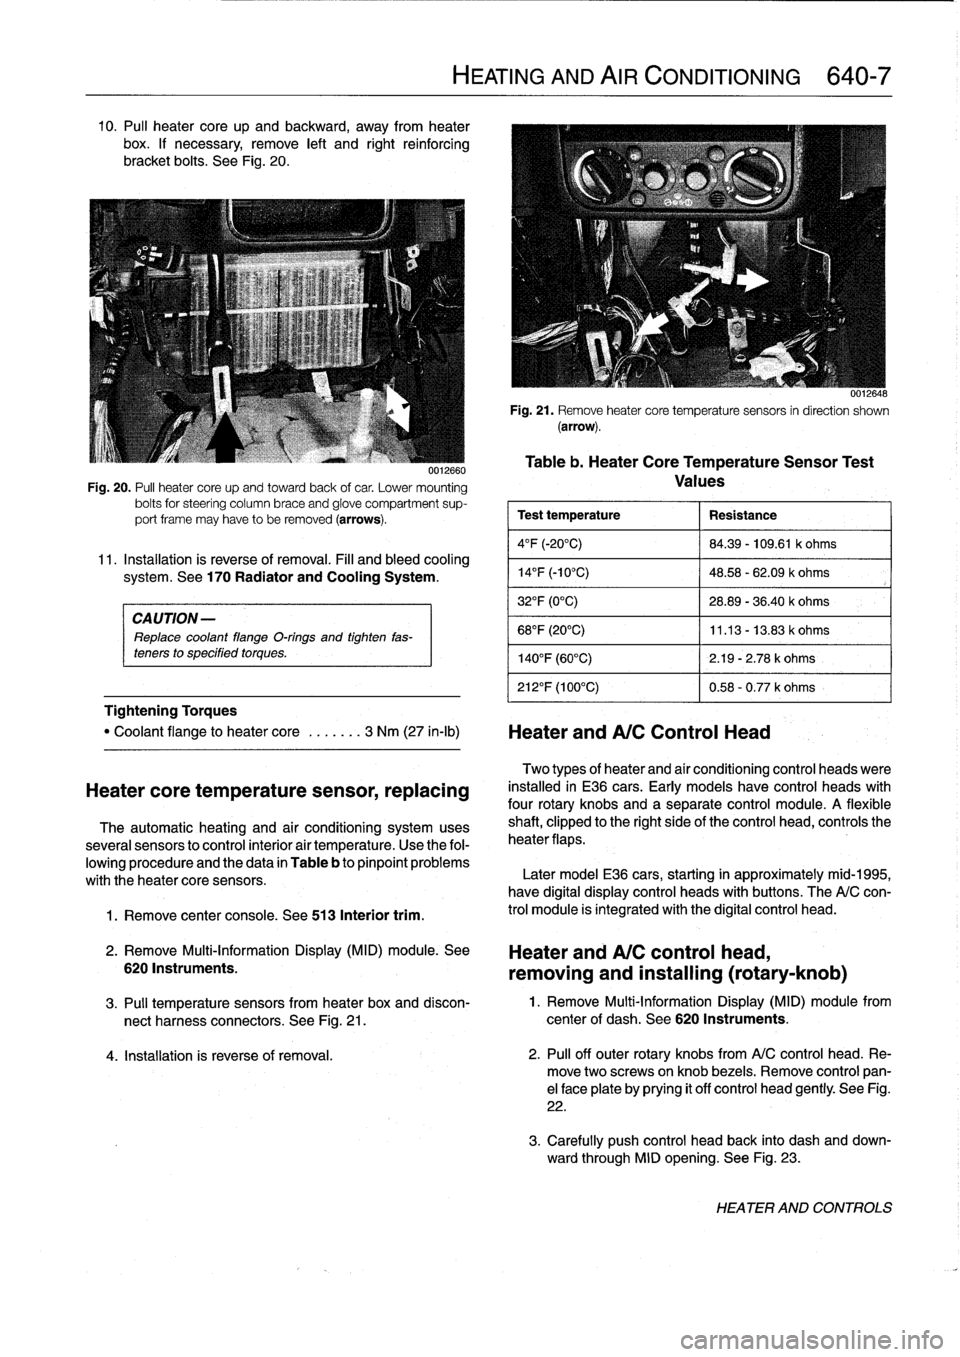 BMW M3 1993 E36 Workshop Manual 10
.
Pul¡
heater
core
up
and
backward,
away
from
heater
box
.
If
necessary,
remove
left
and
right
reinforcing
bracket
bolts
.
See
Fig
.
20
.

CAUTION-

Replace
coolant
flange
O-rings
and
tighten
fas-